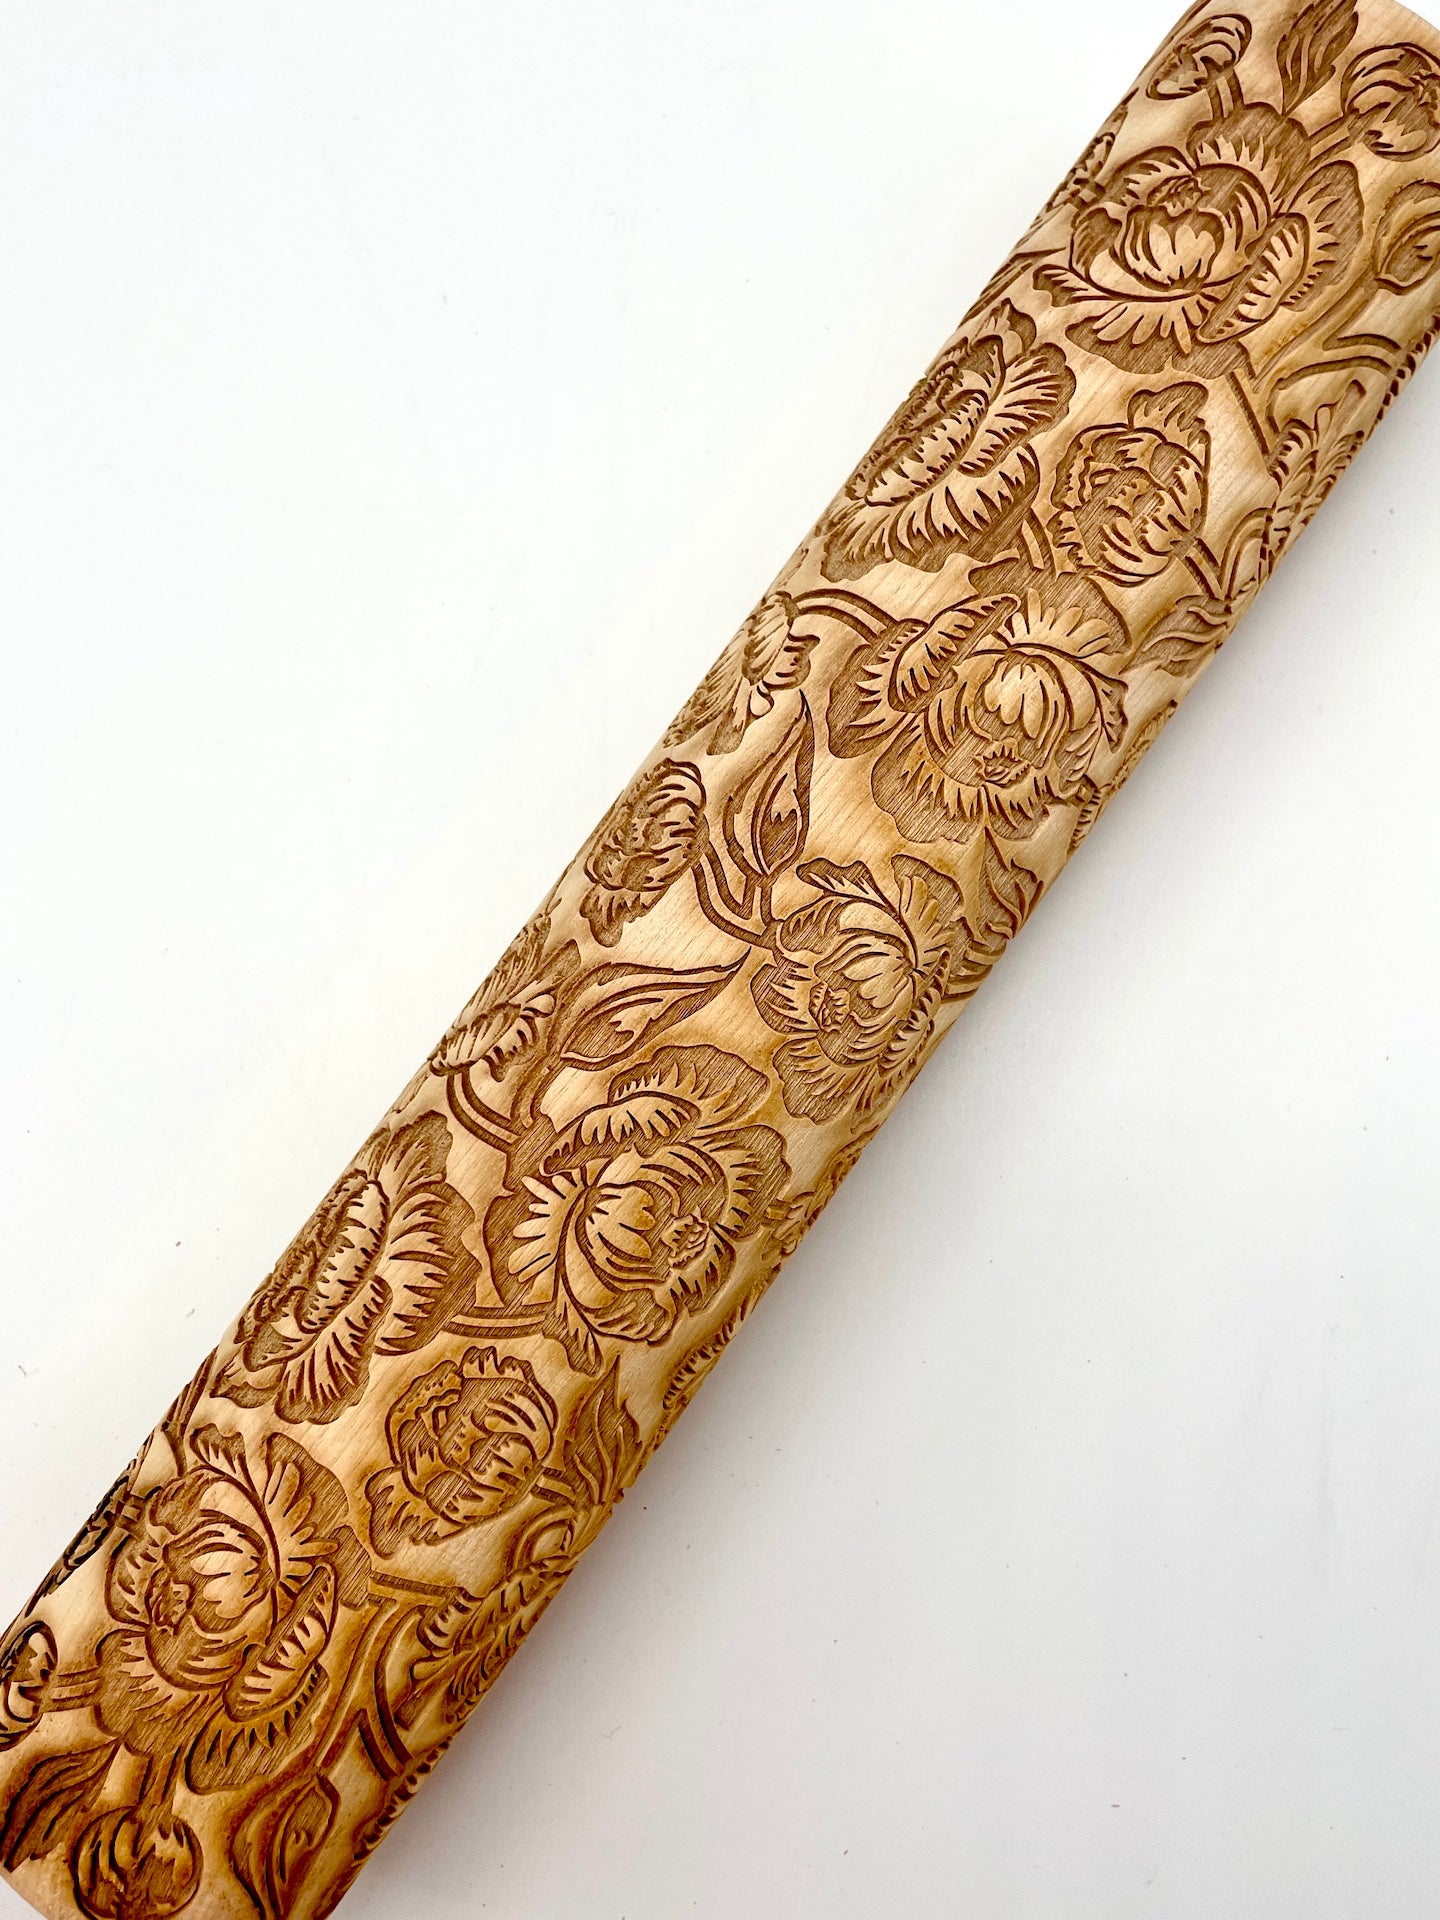 Peonies Textured Rolling Pin